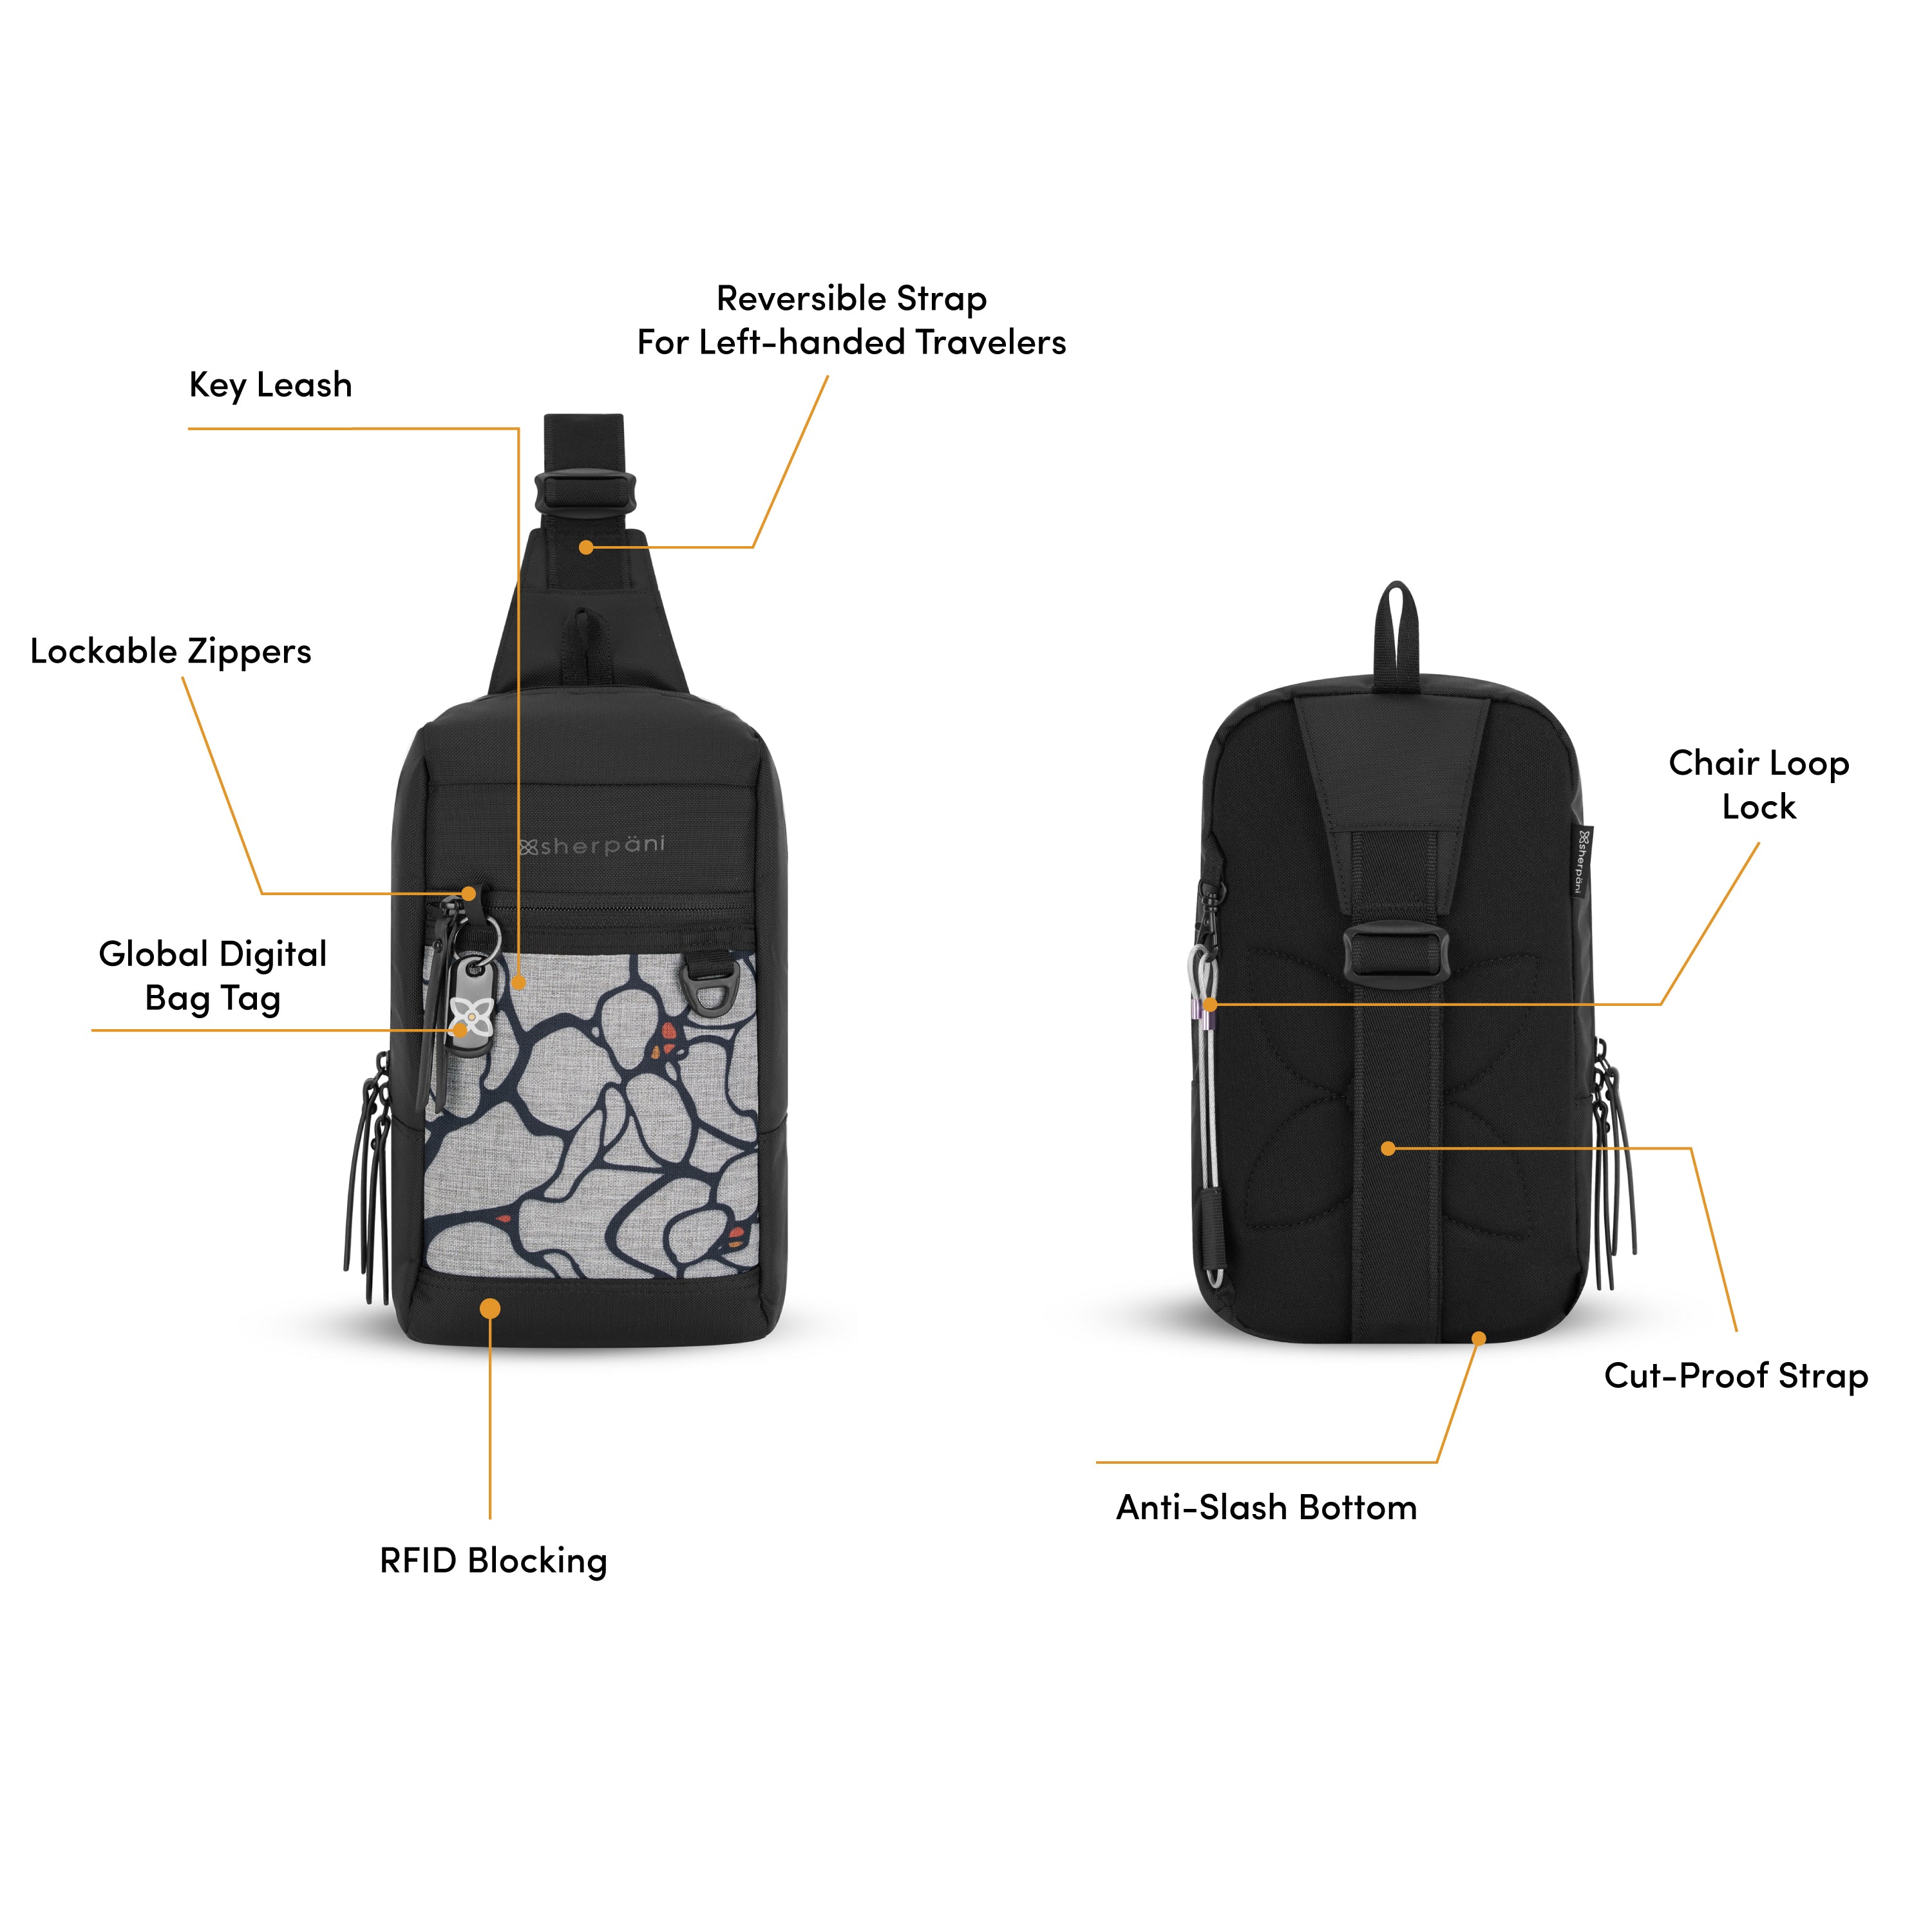 Graphic showing front and back view of the Sherpani Metro travel sling bag. Yellow circles highlight the following features: key leash, lockable zipper pocket, bag tag, RFID blocking material, wire loop lock for theft prevention, slash-proof strap and reinforced uncuttable bottom. 